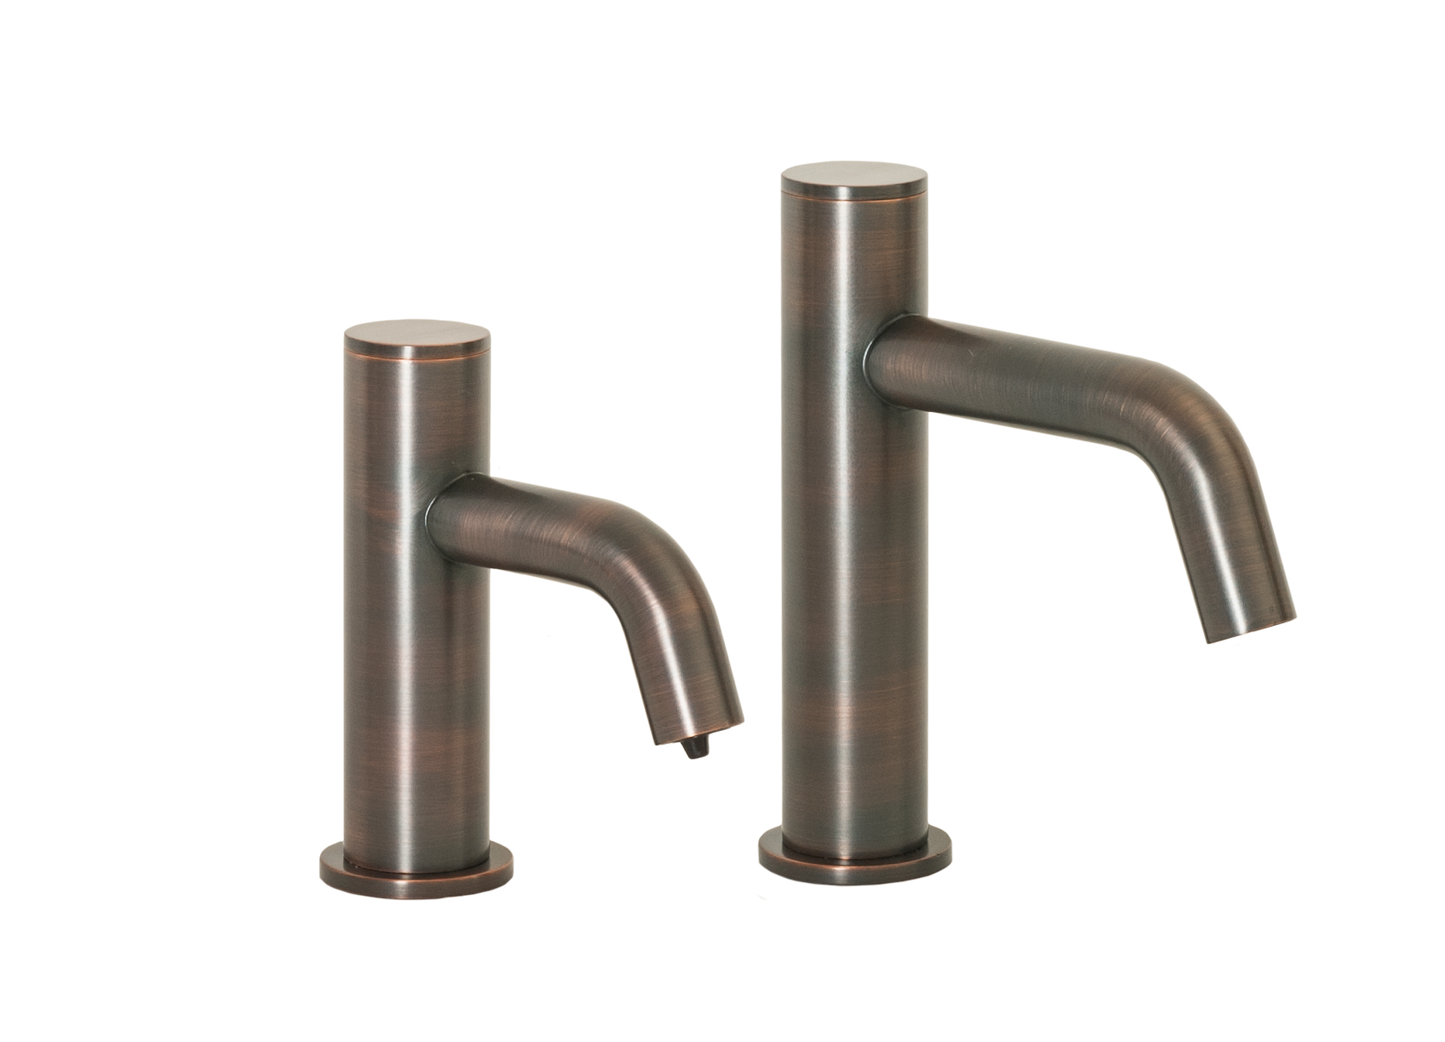 MP3260 Automatic Hands-Free Faucet with 6” Spout Reach and Automatic Soap Dispenser with 32oz. Bottle In Venetian Bronze